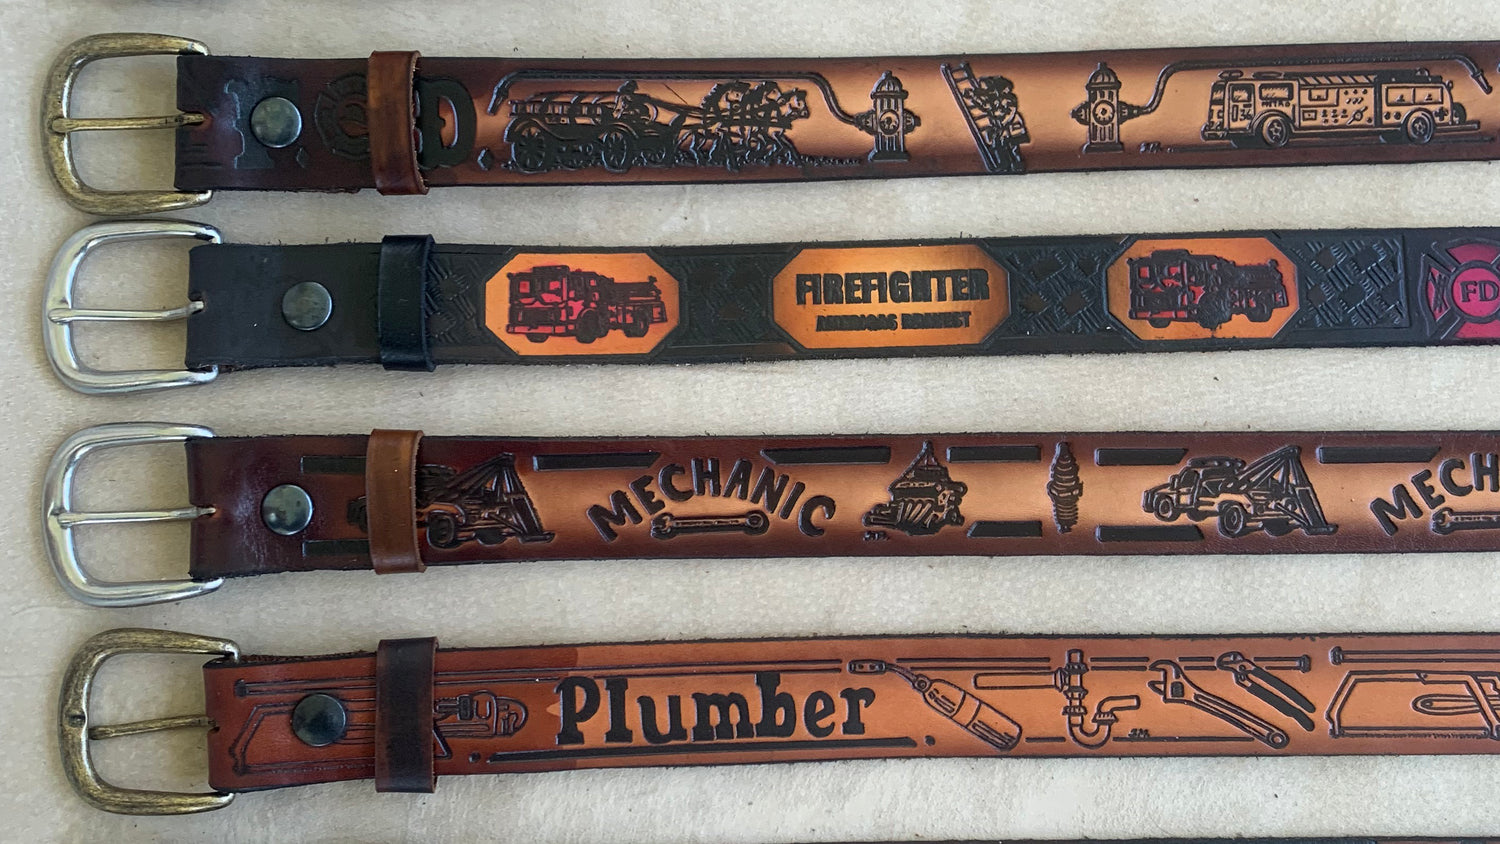 CARRIESU Personalized Custom Name Leather Belt, Customize Text